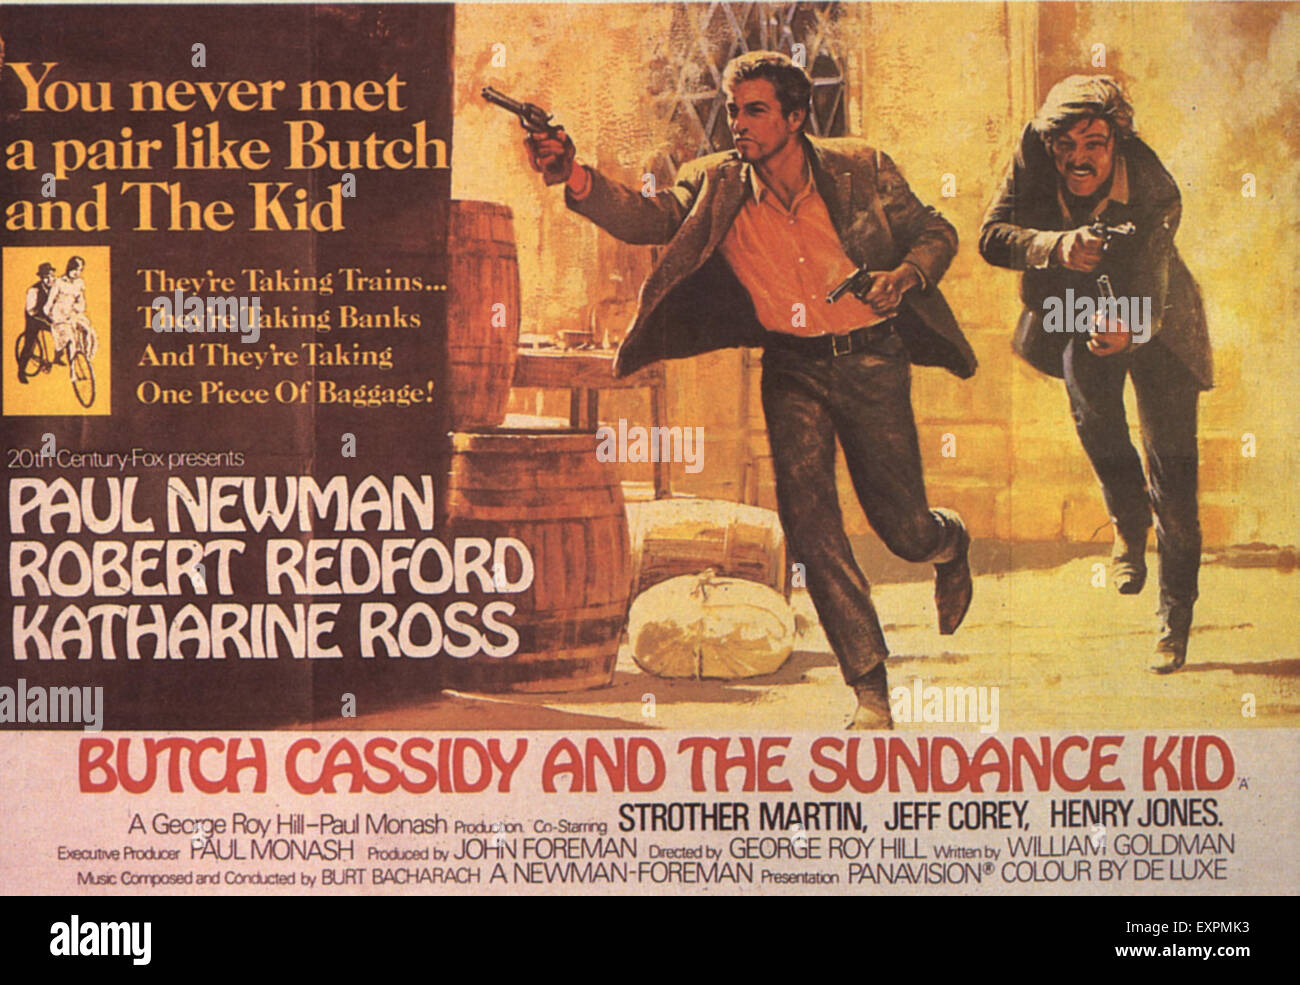 1960s USA Butch Cassidy And The Sundance Kid Film Poster Stock Photo